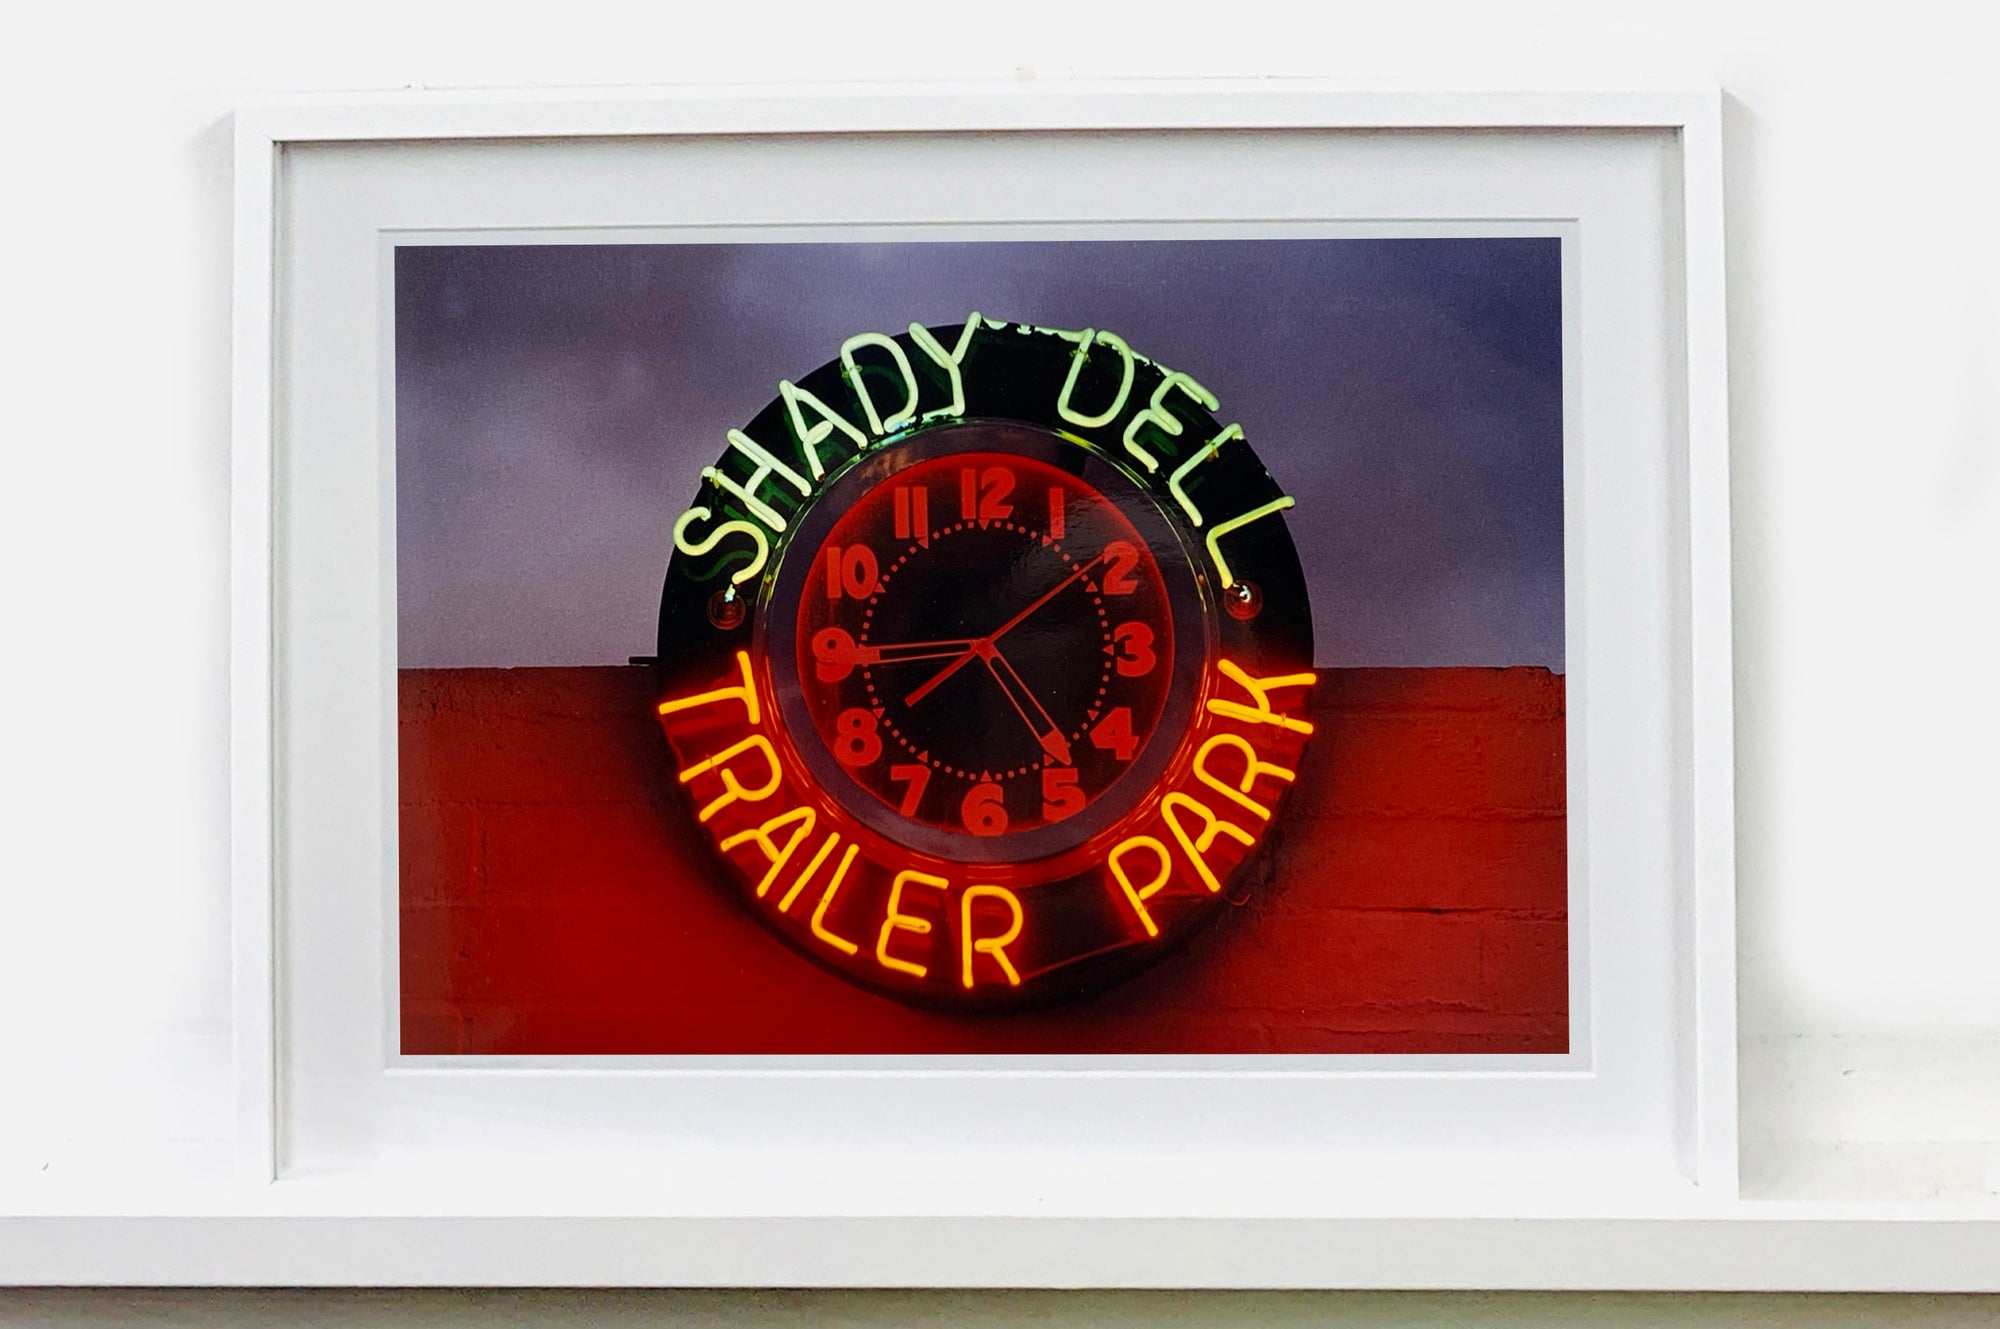 A neon sign belonging to Shady Dell Trailer Park in Bisbee, Arizona, which provides trailer and camping spaces to weary travellers along the famous Highway 80, which stretches from Savannah, Georgia to San Diego, California. This piece is part of Richard Heeps' 'Dream in Colour' series. 